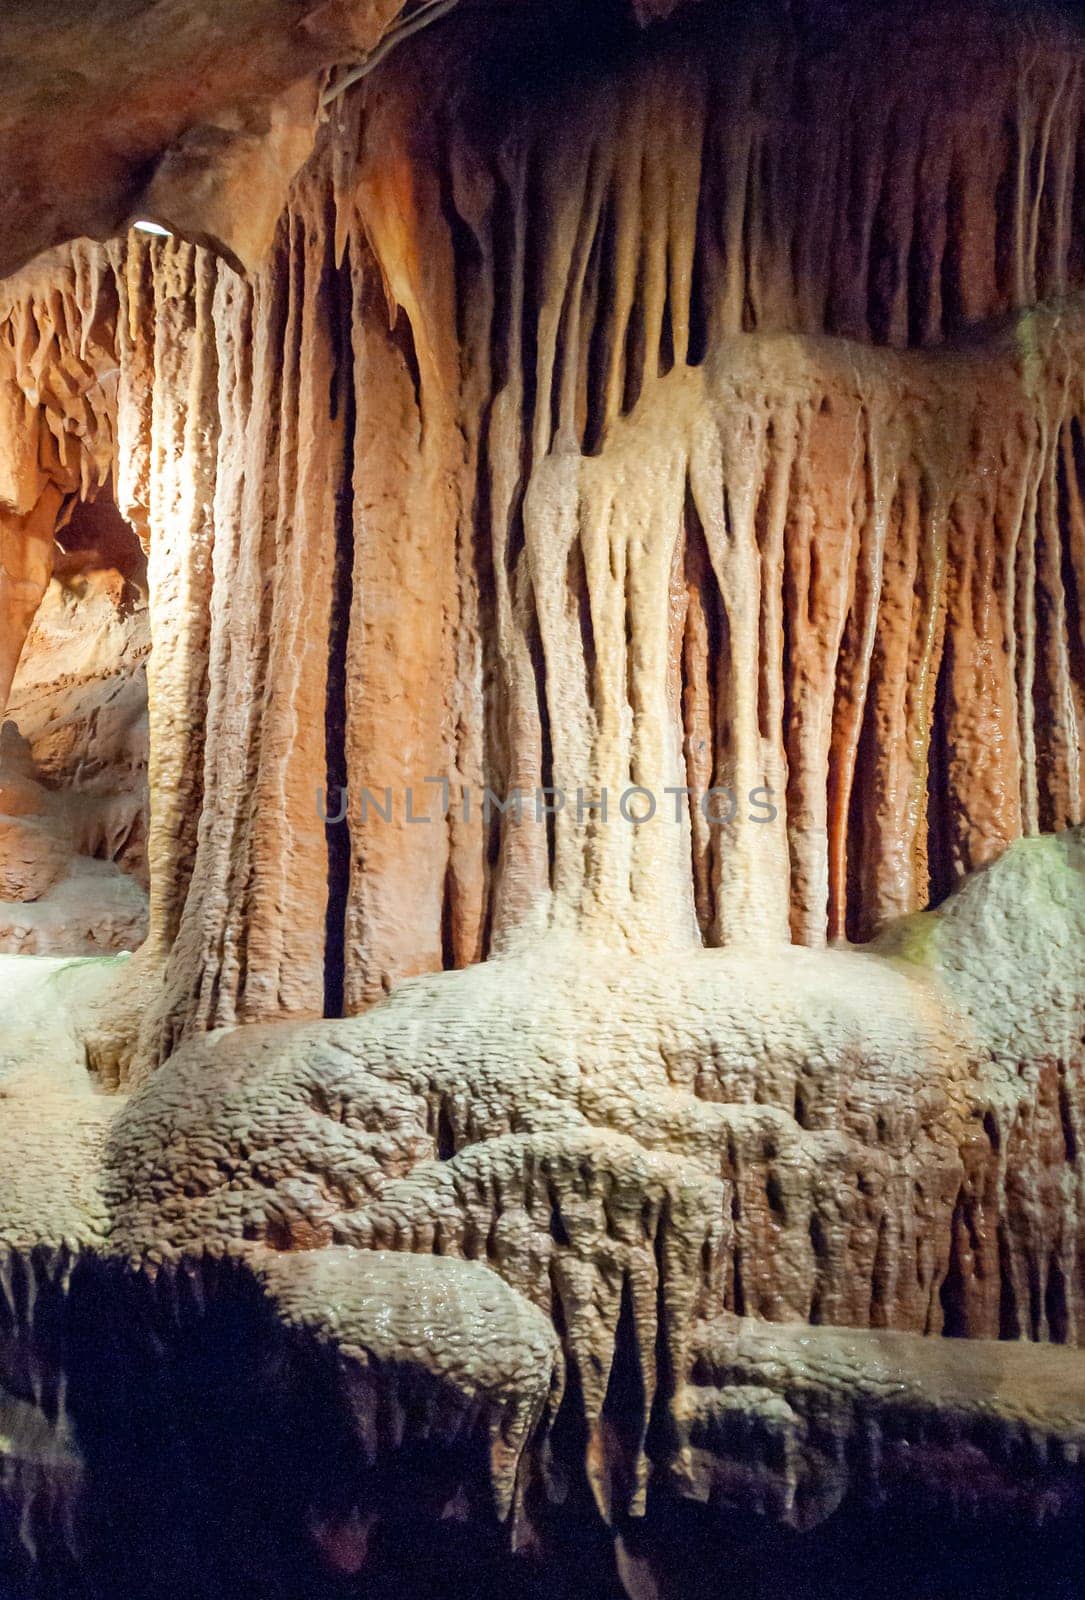 Calcite inlets, stalactites and stalagmites in large underground halls in Carlsbad Caverns NP, New Mexico by Hydrobiolog